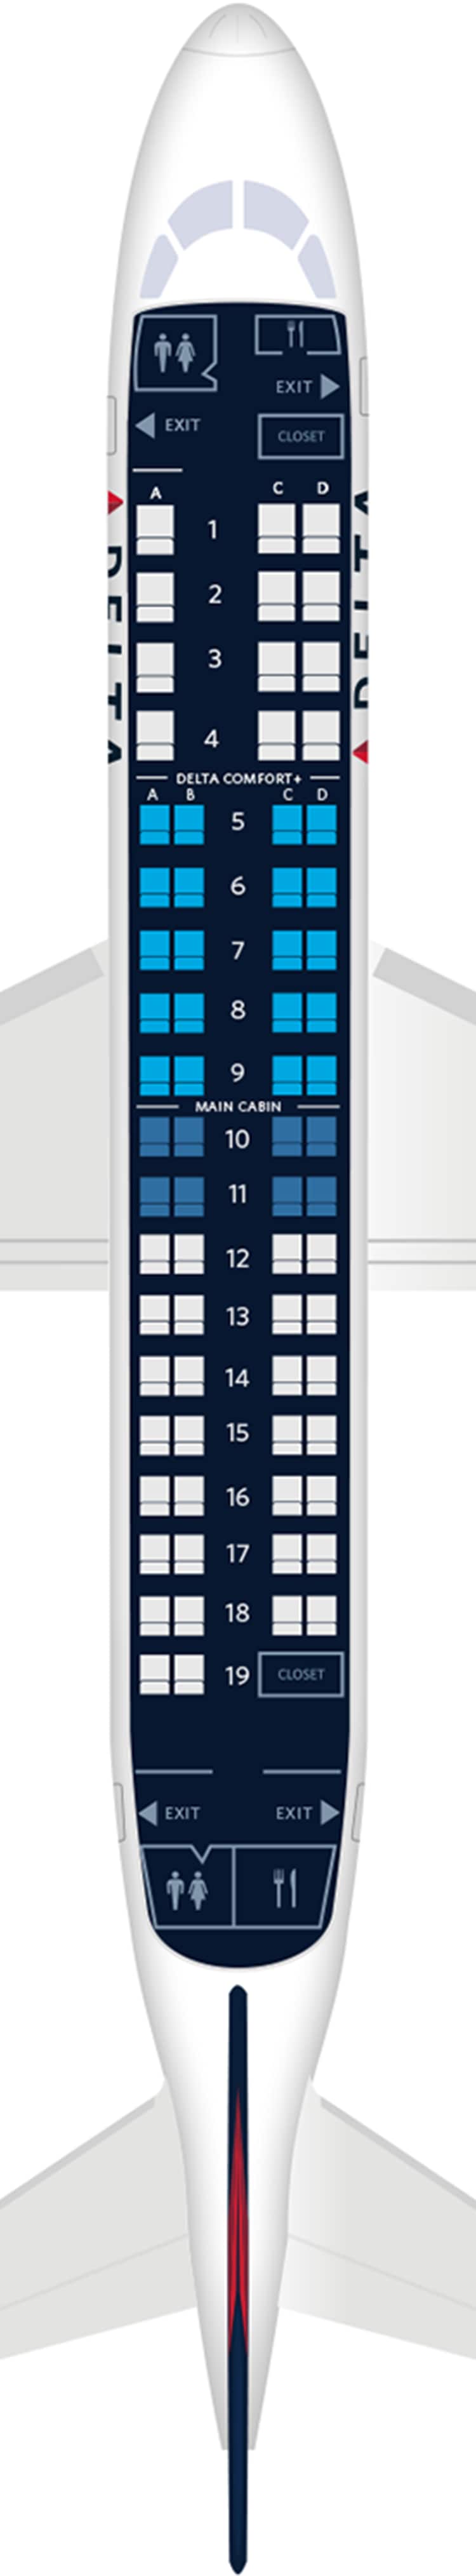 Embraer 190 Seating Chart